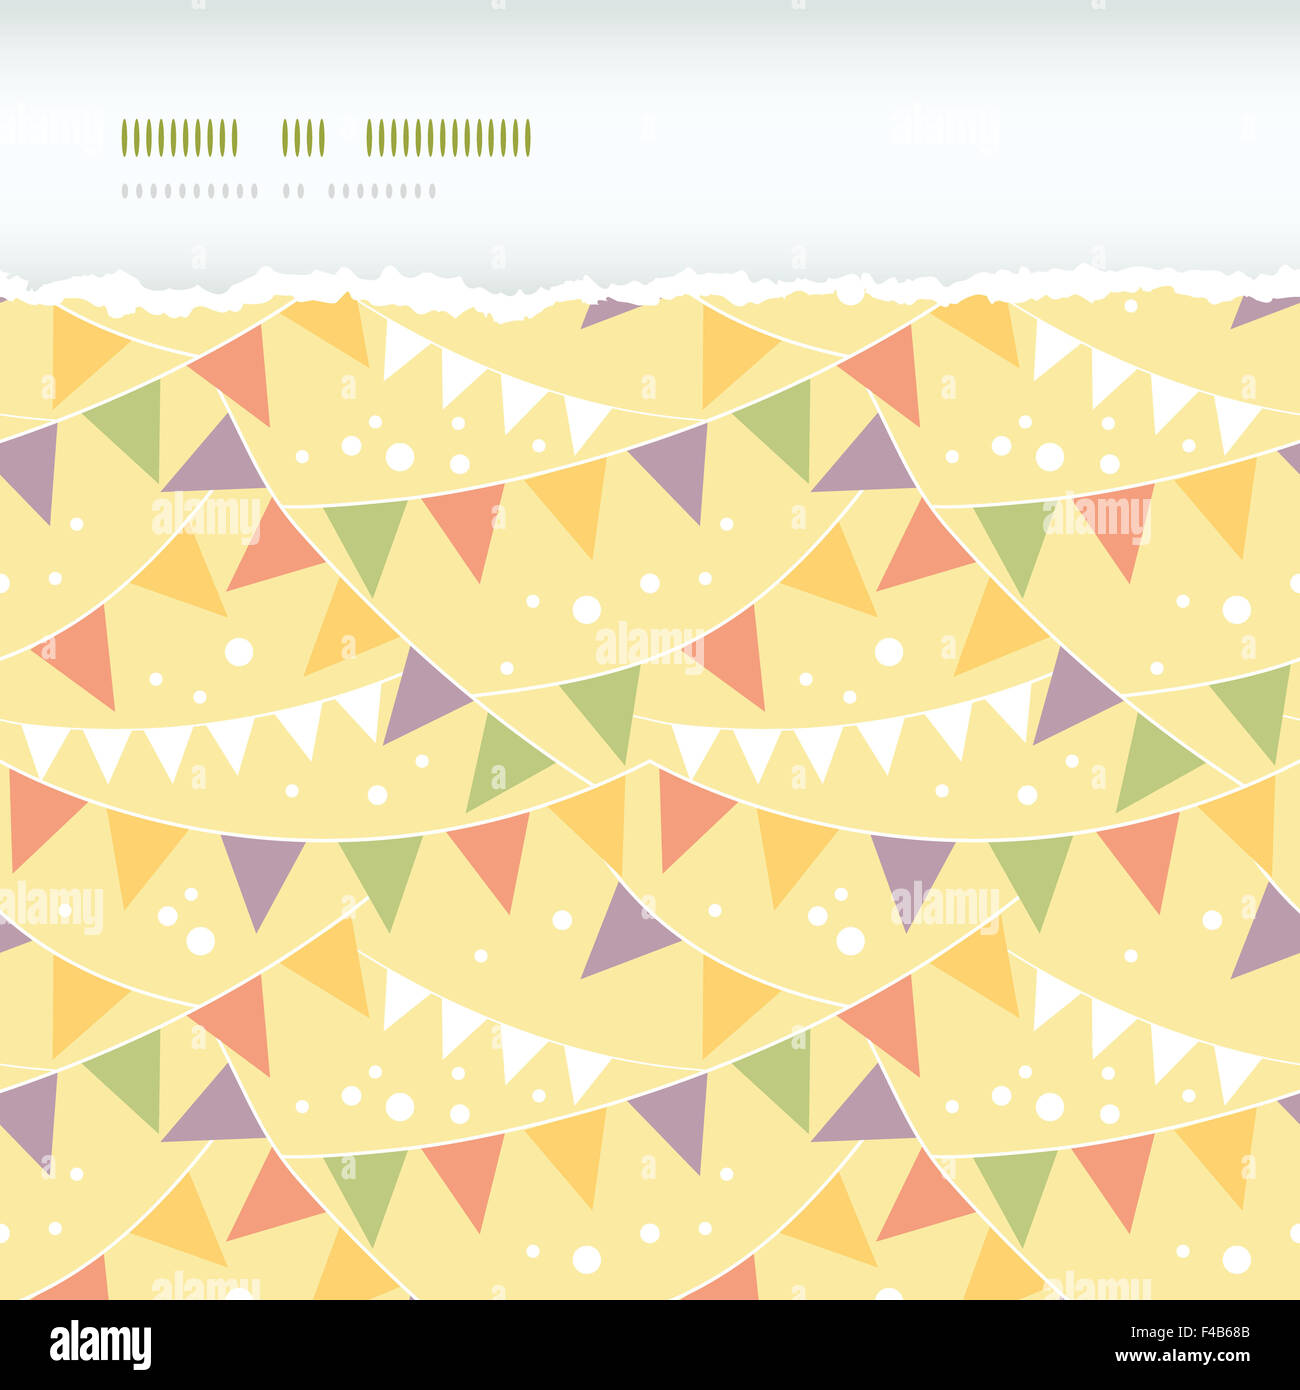 Party Decorations Bunting Horizontal Torn Seamless Pattern Background Stock Photo